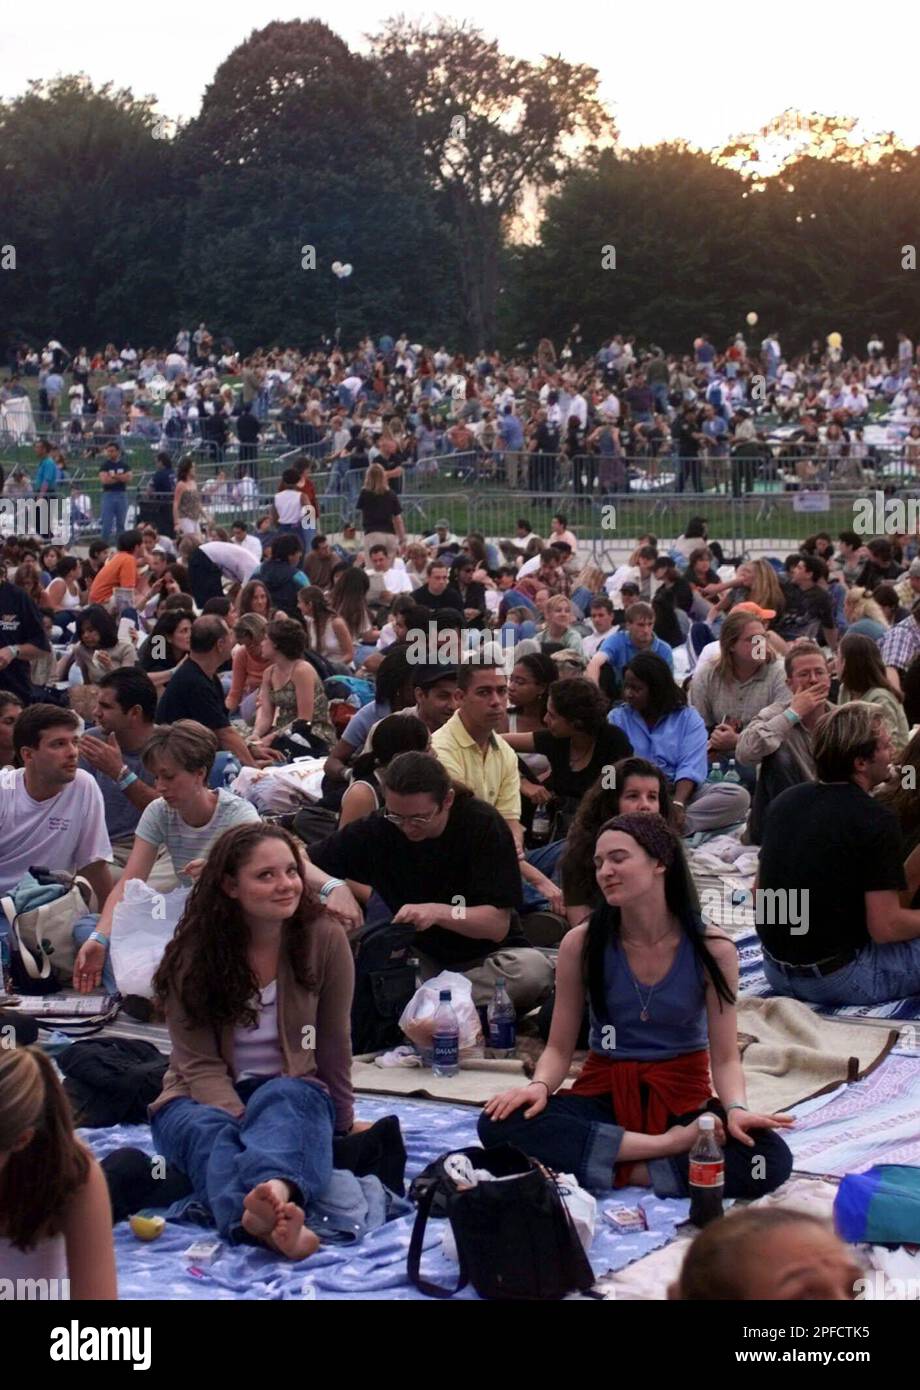 People wait on blankets on the lawn of New York's Central Park for the  start of the "Sheryl Crow and Friends" concert Tuesday, Sept. 14, 1999.  Among Crow's friends performing in the